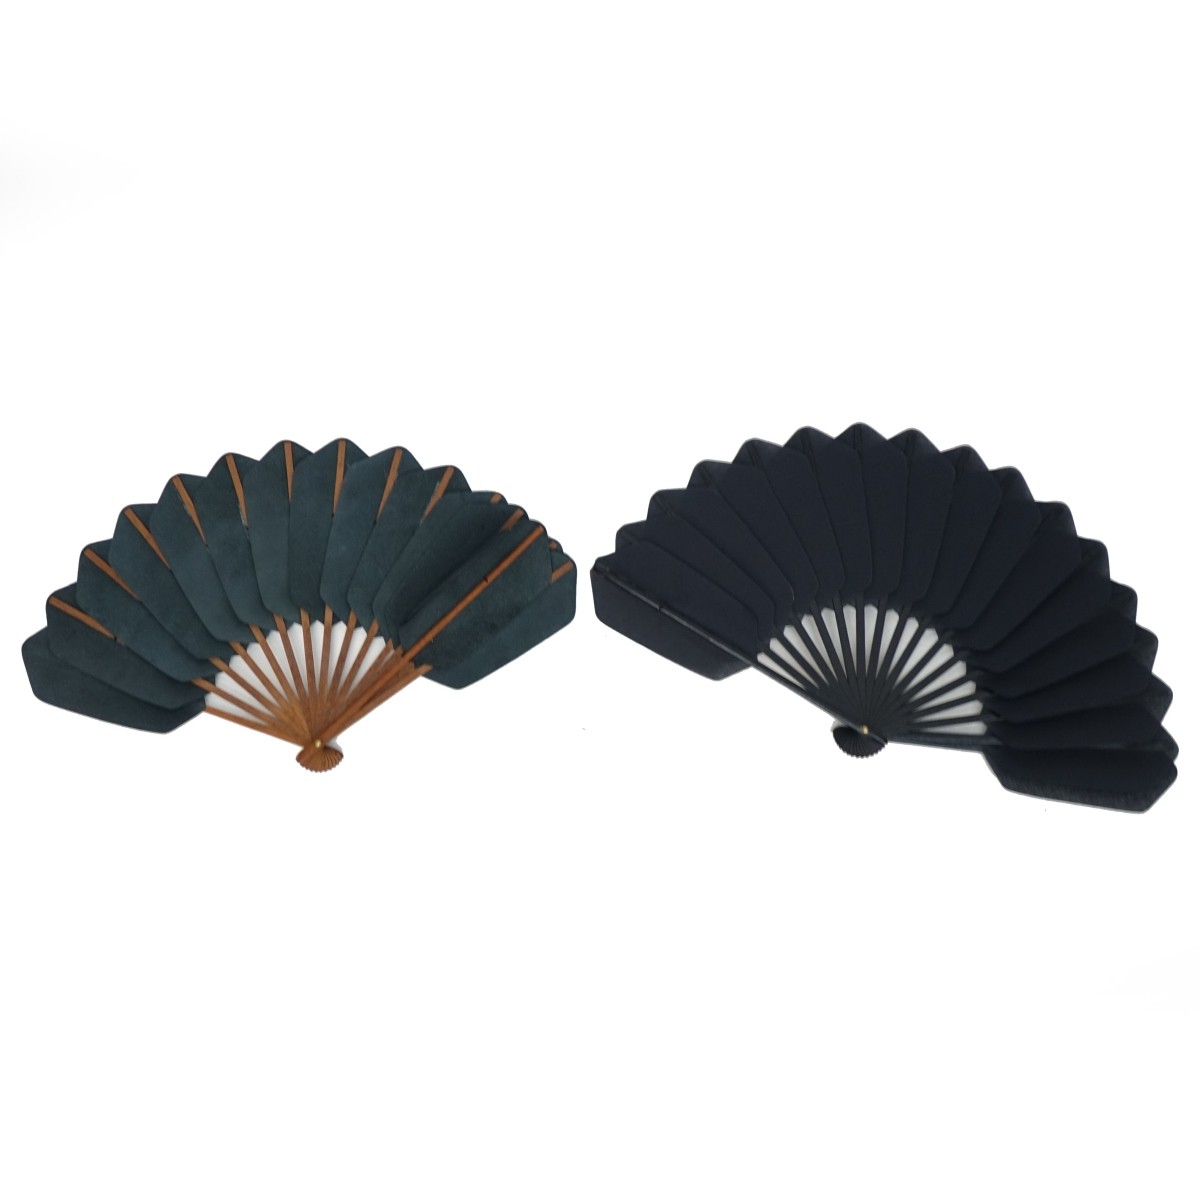 (2) Duvelleroy French Hand Fans